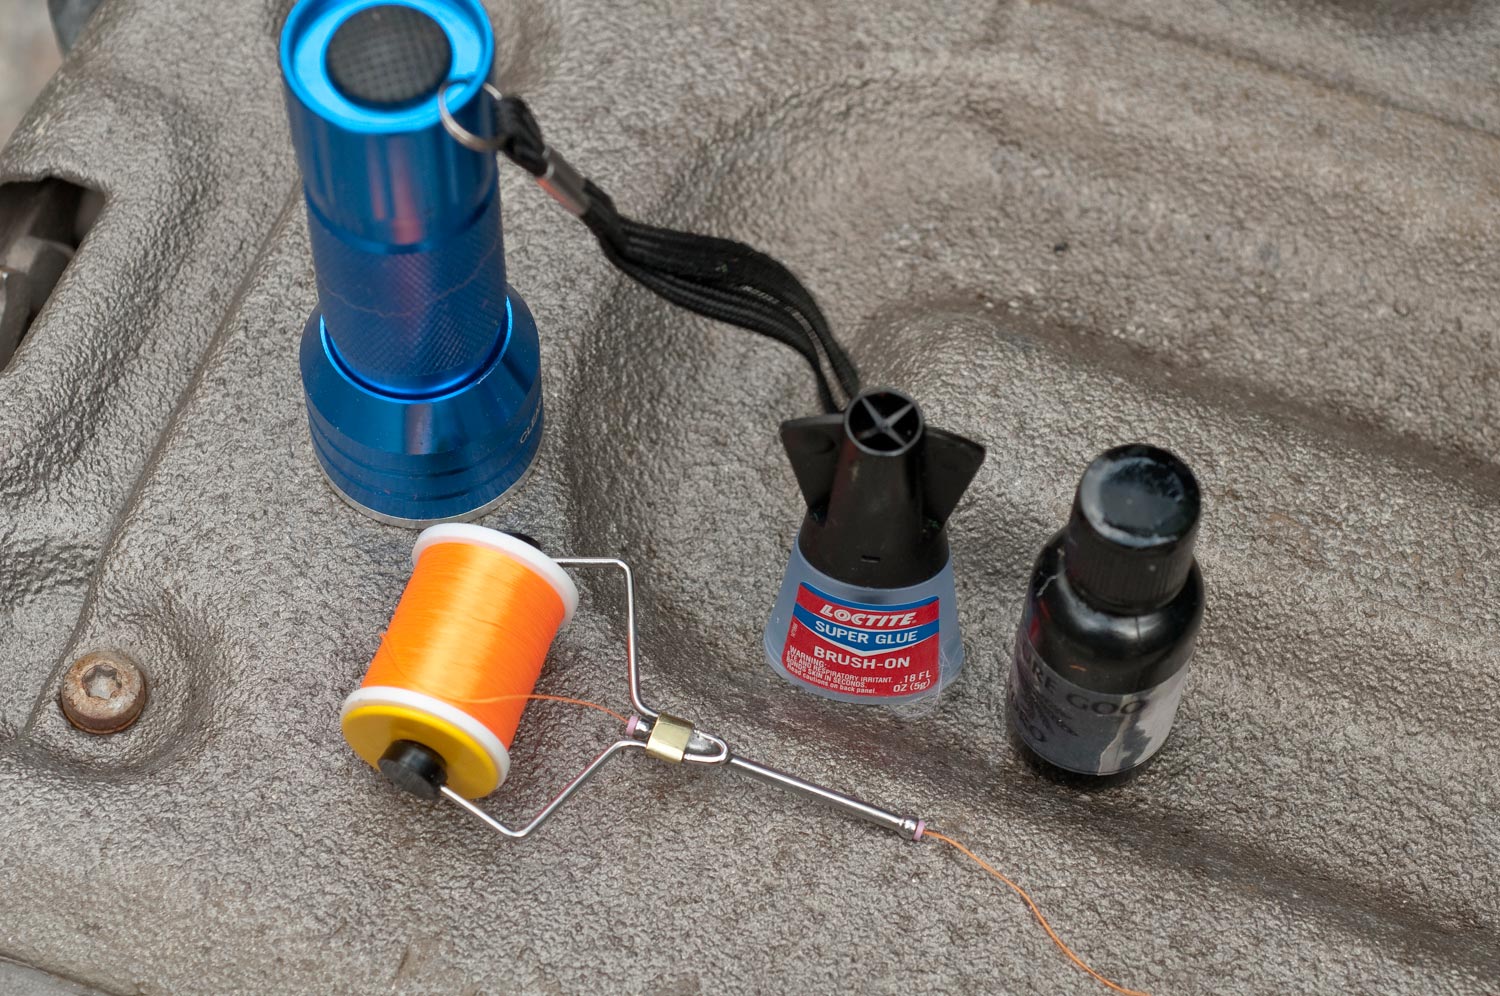 3 Options For Attaching A Leader To Your Fly Line - Fly Fishing